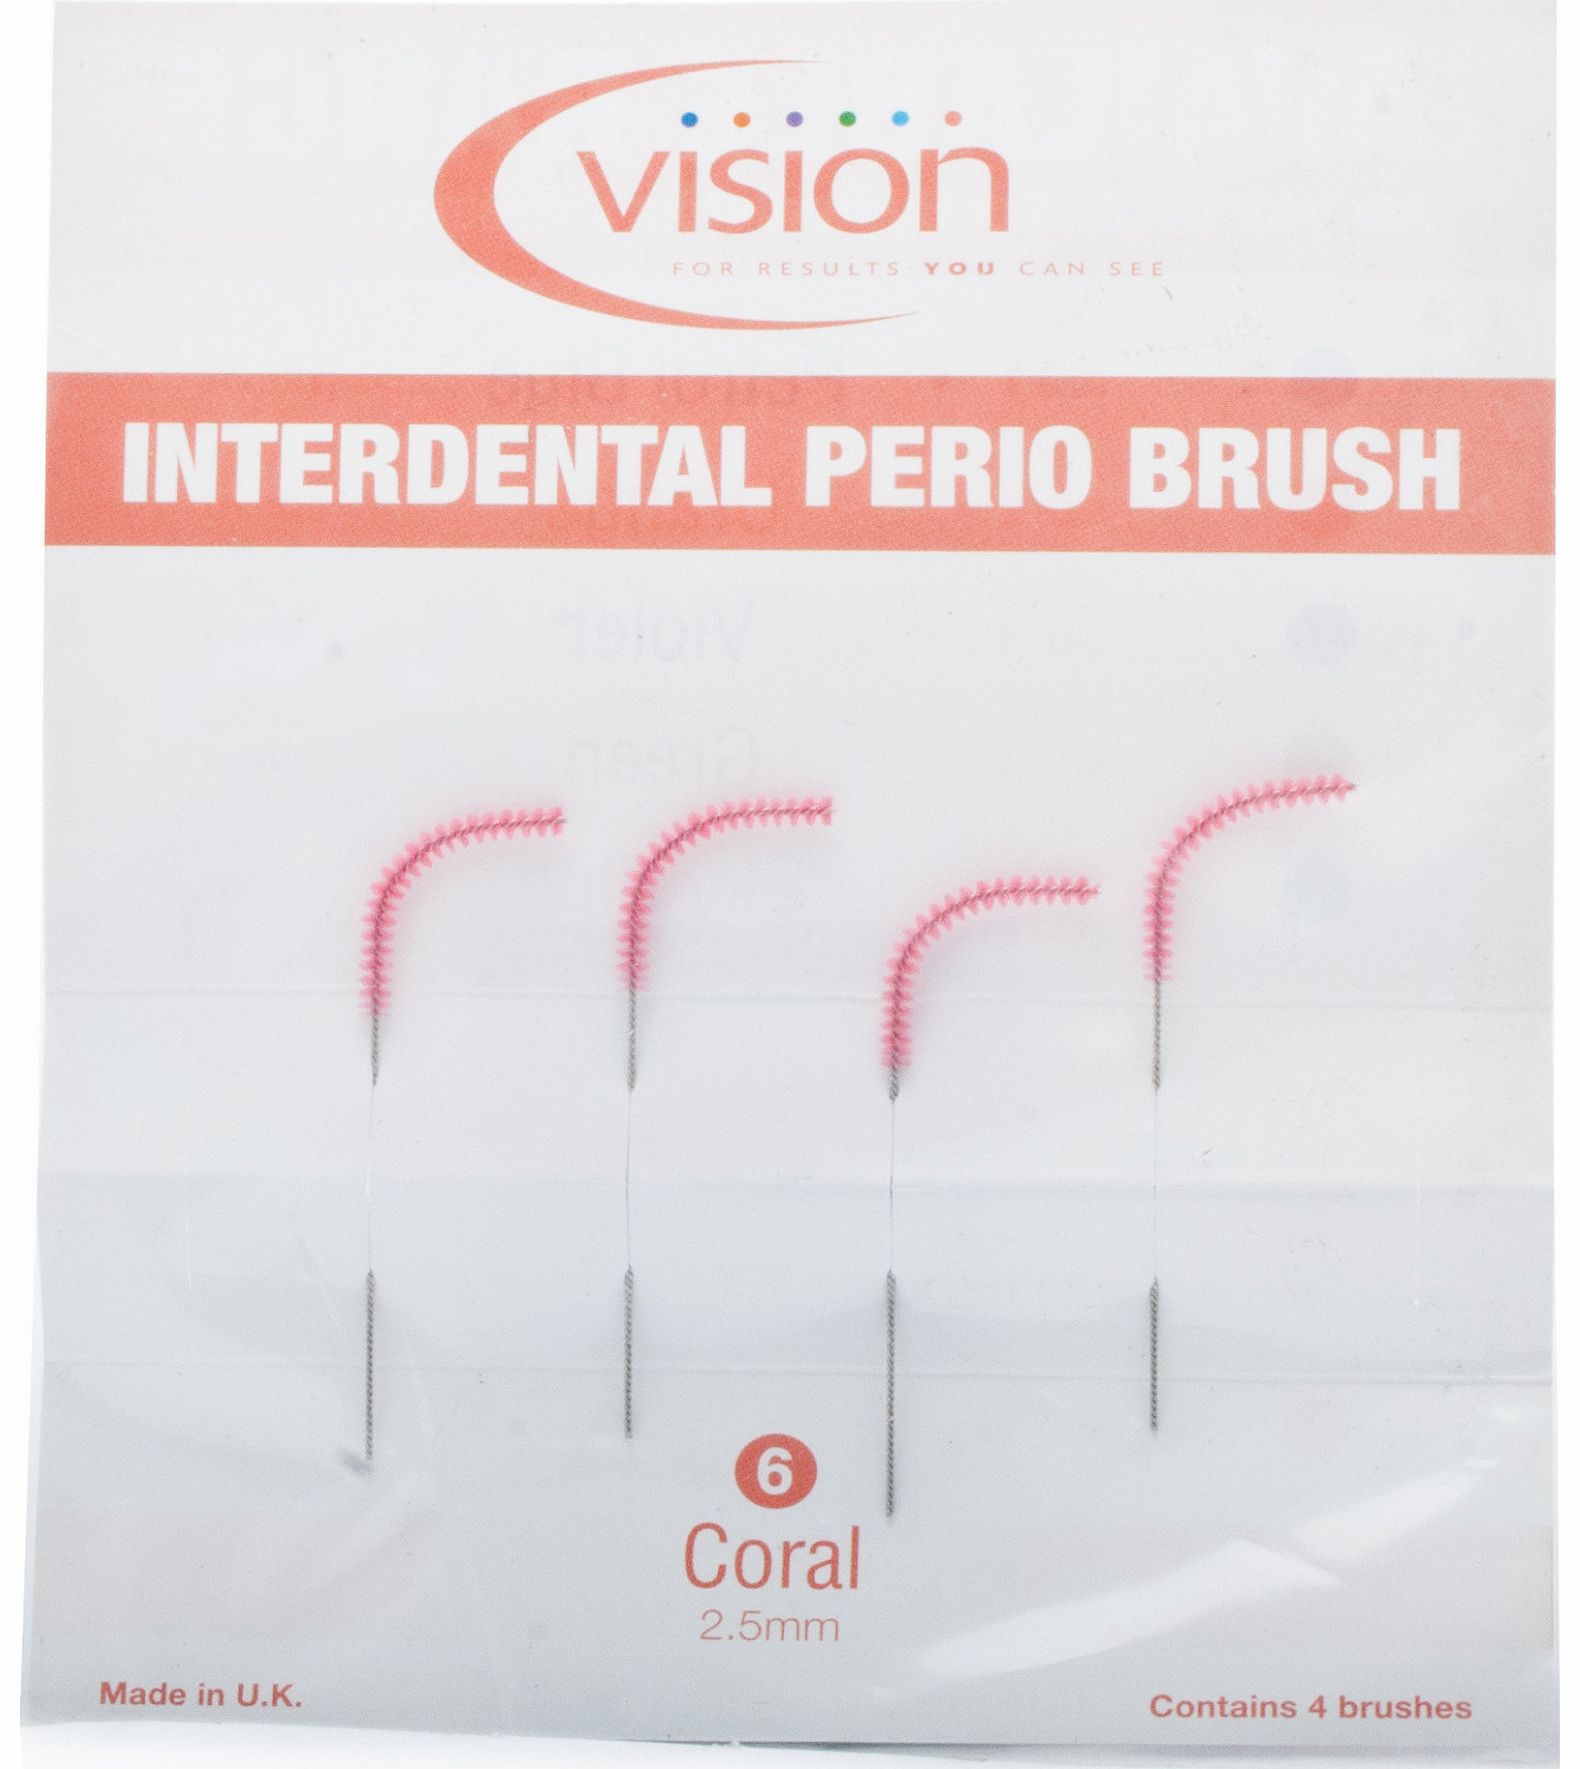 Interdental Perio Brushes - 2.5mm Coral